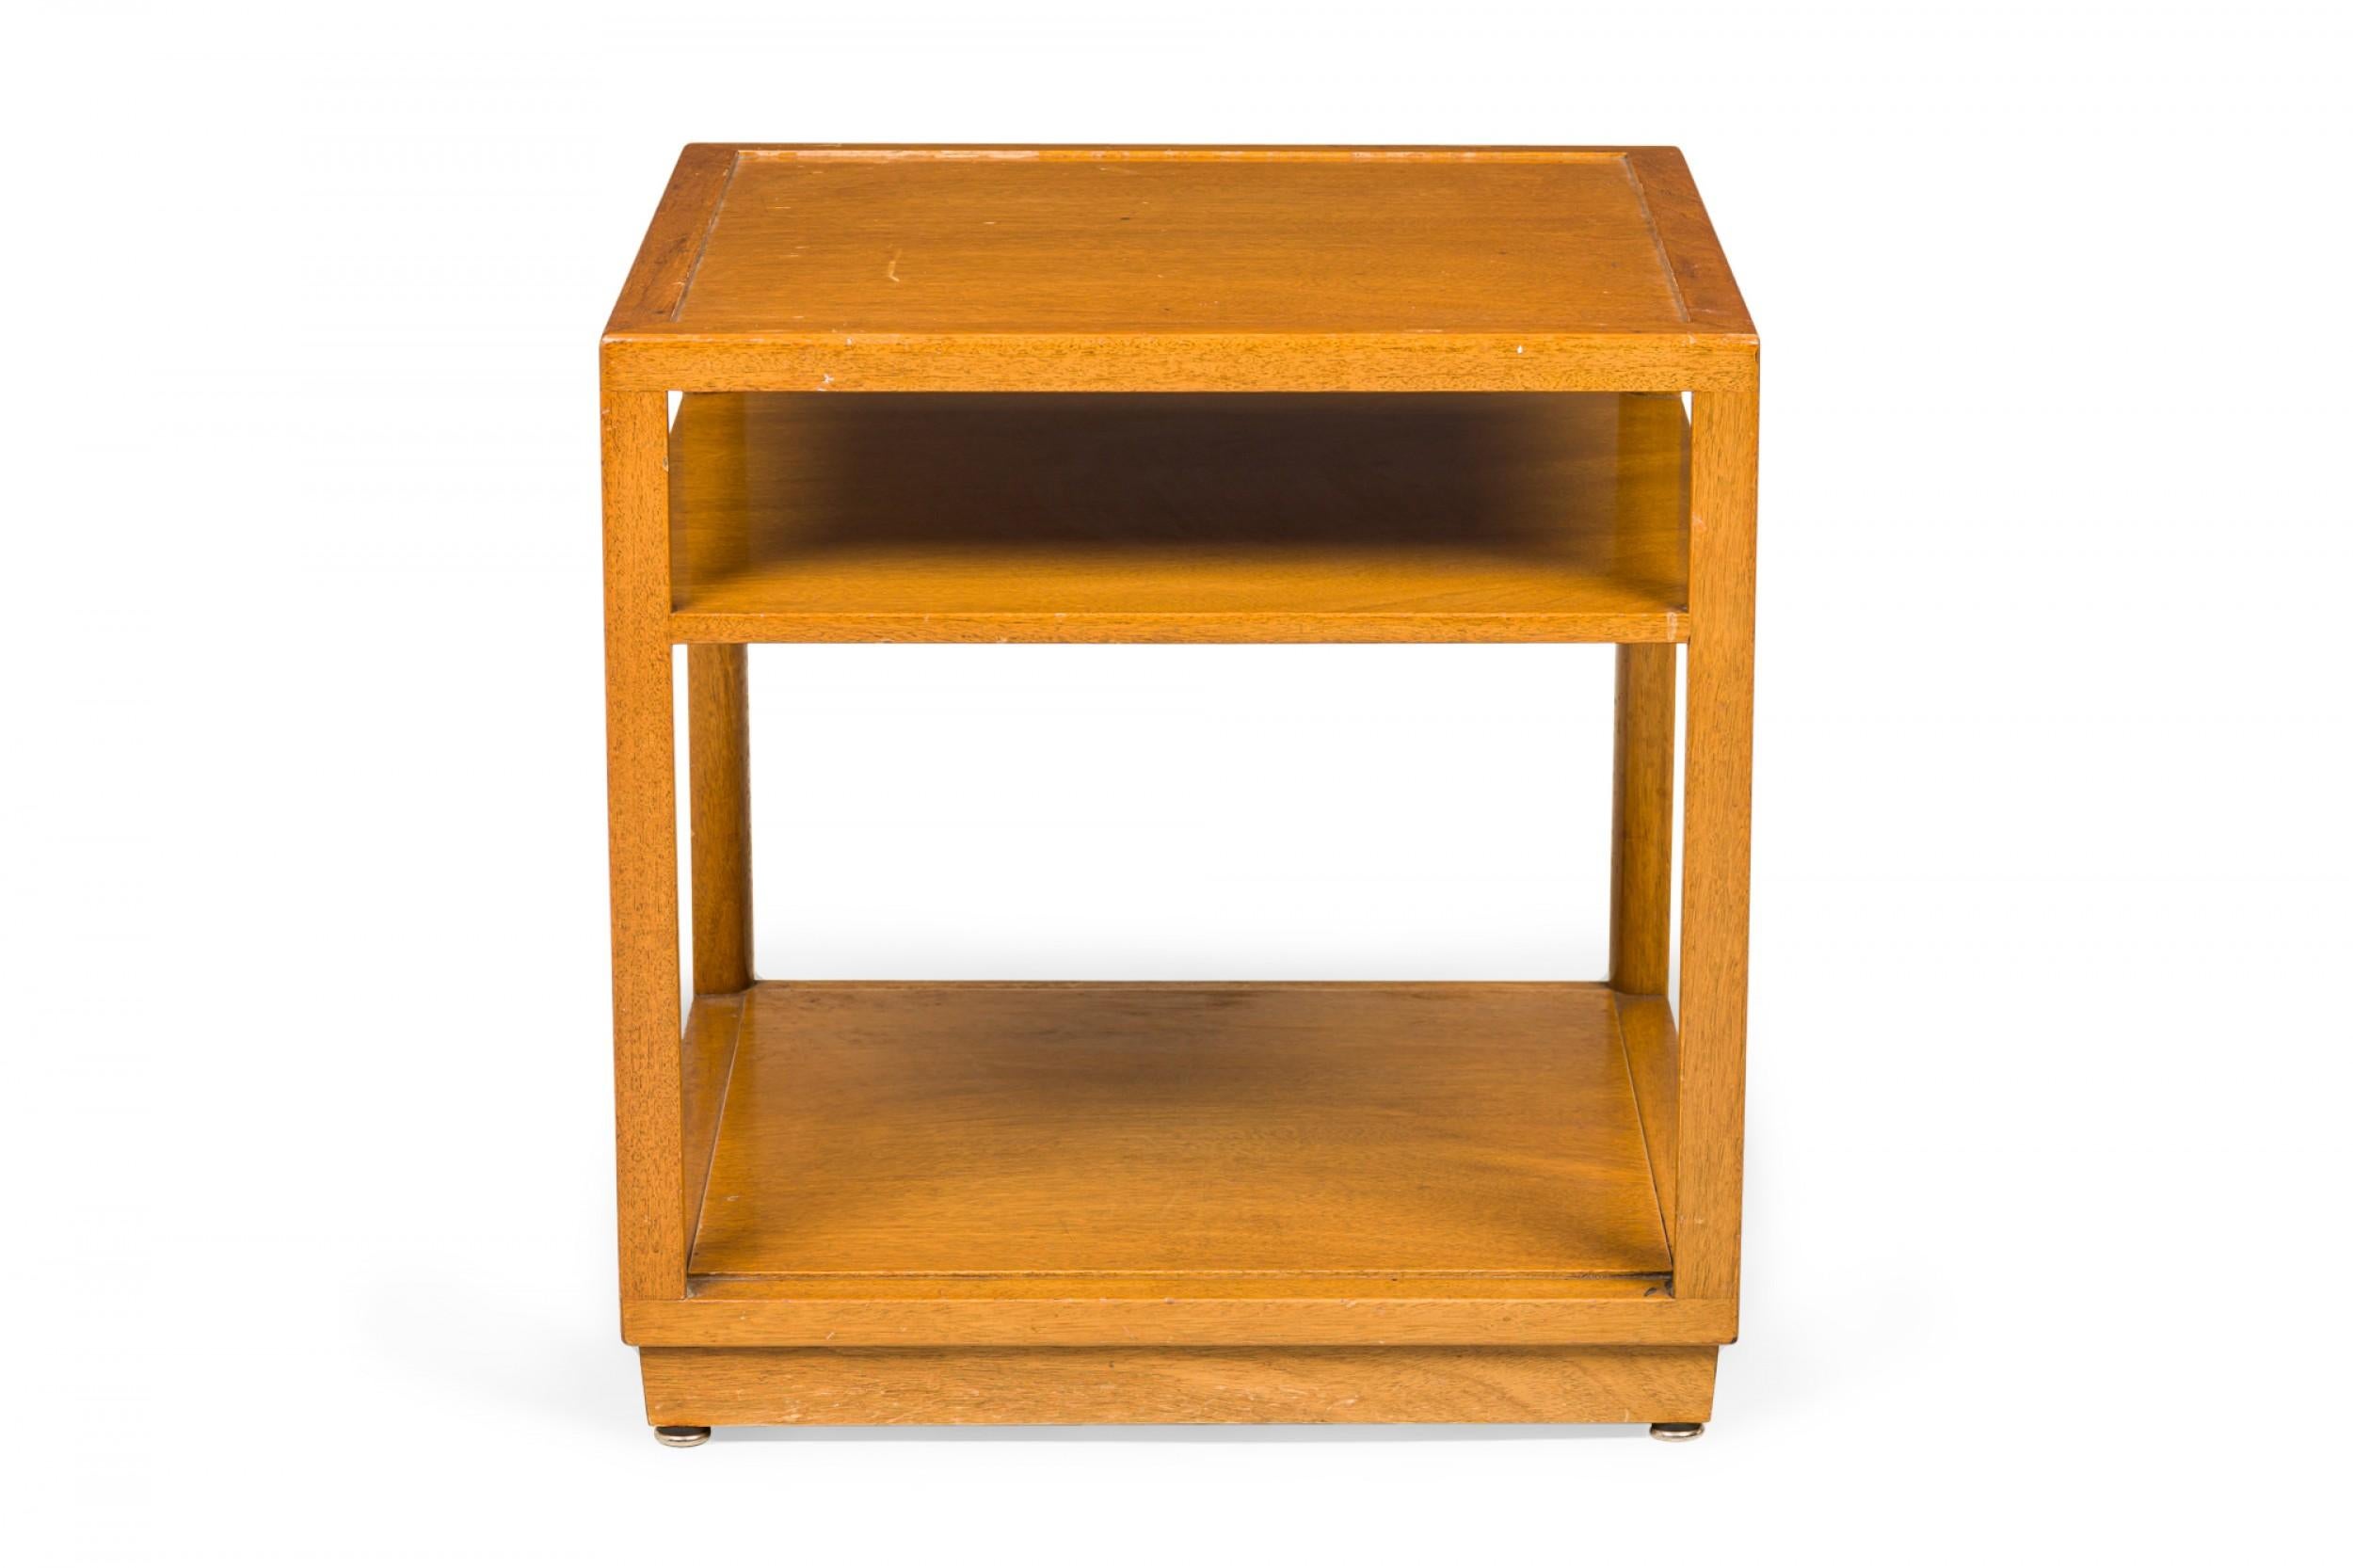 American Pair of Edward Wormley for Dunbar Square Wooden Double Shelf End / Side Table For Sale